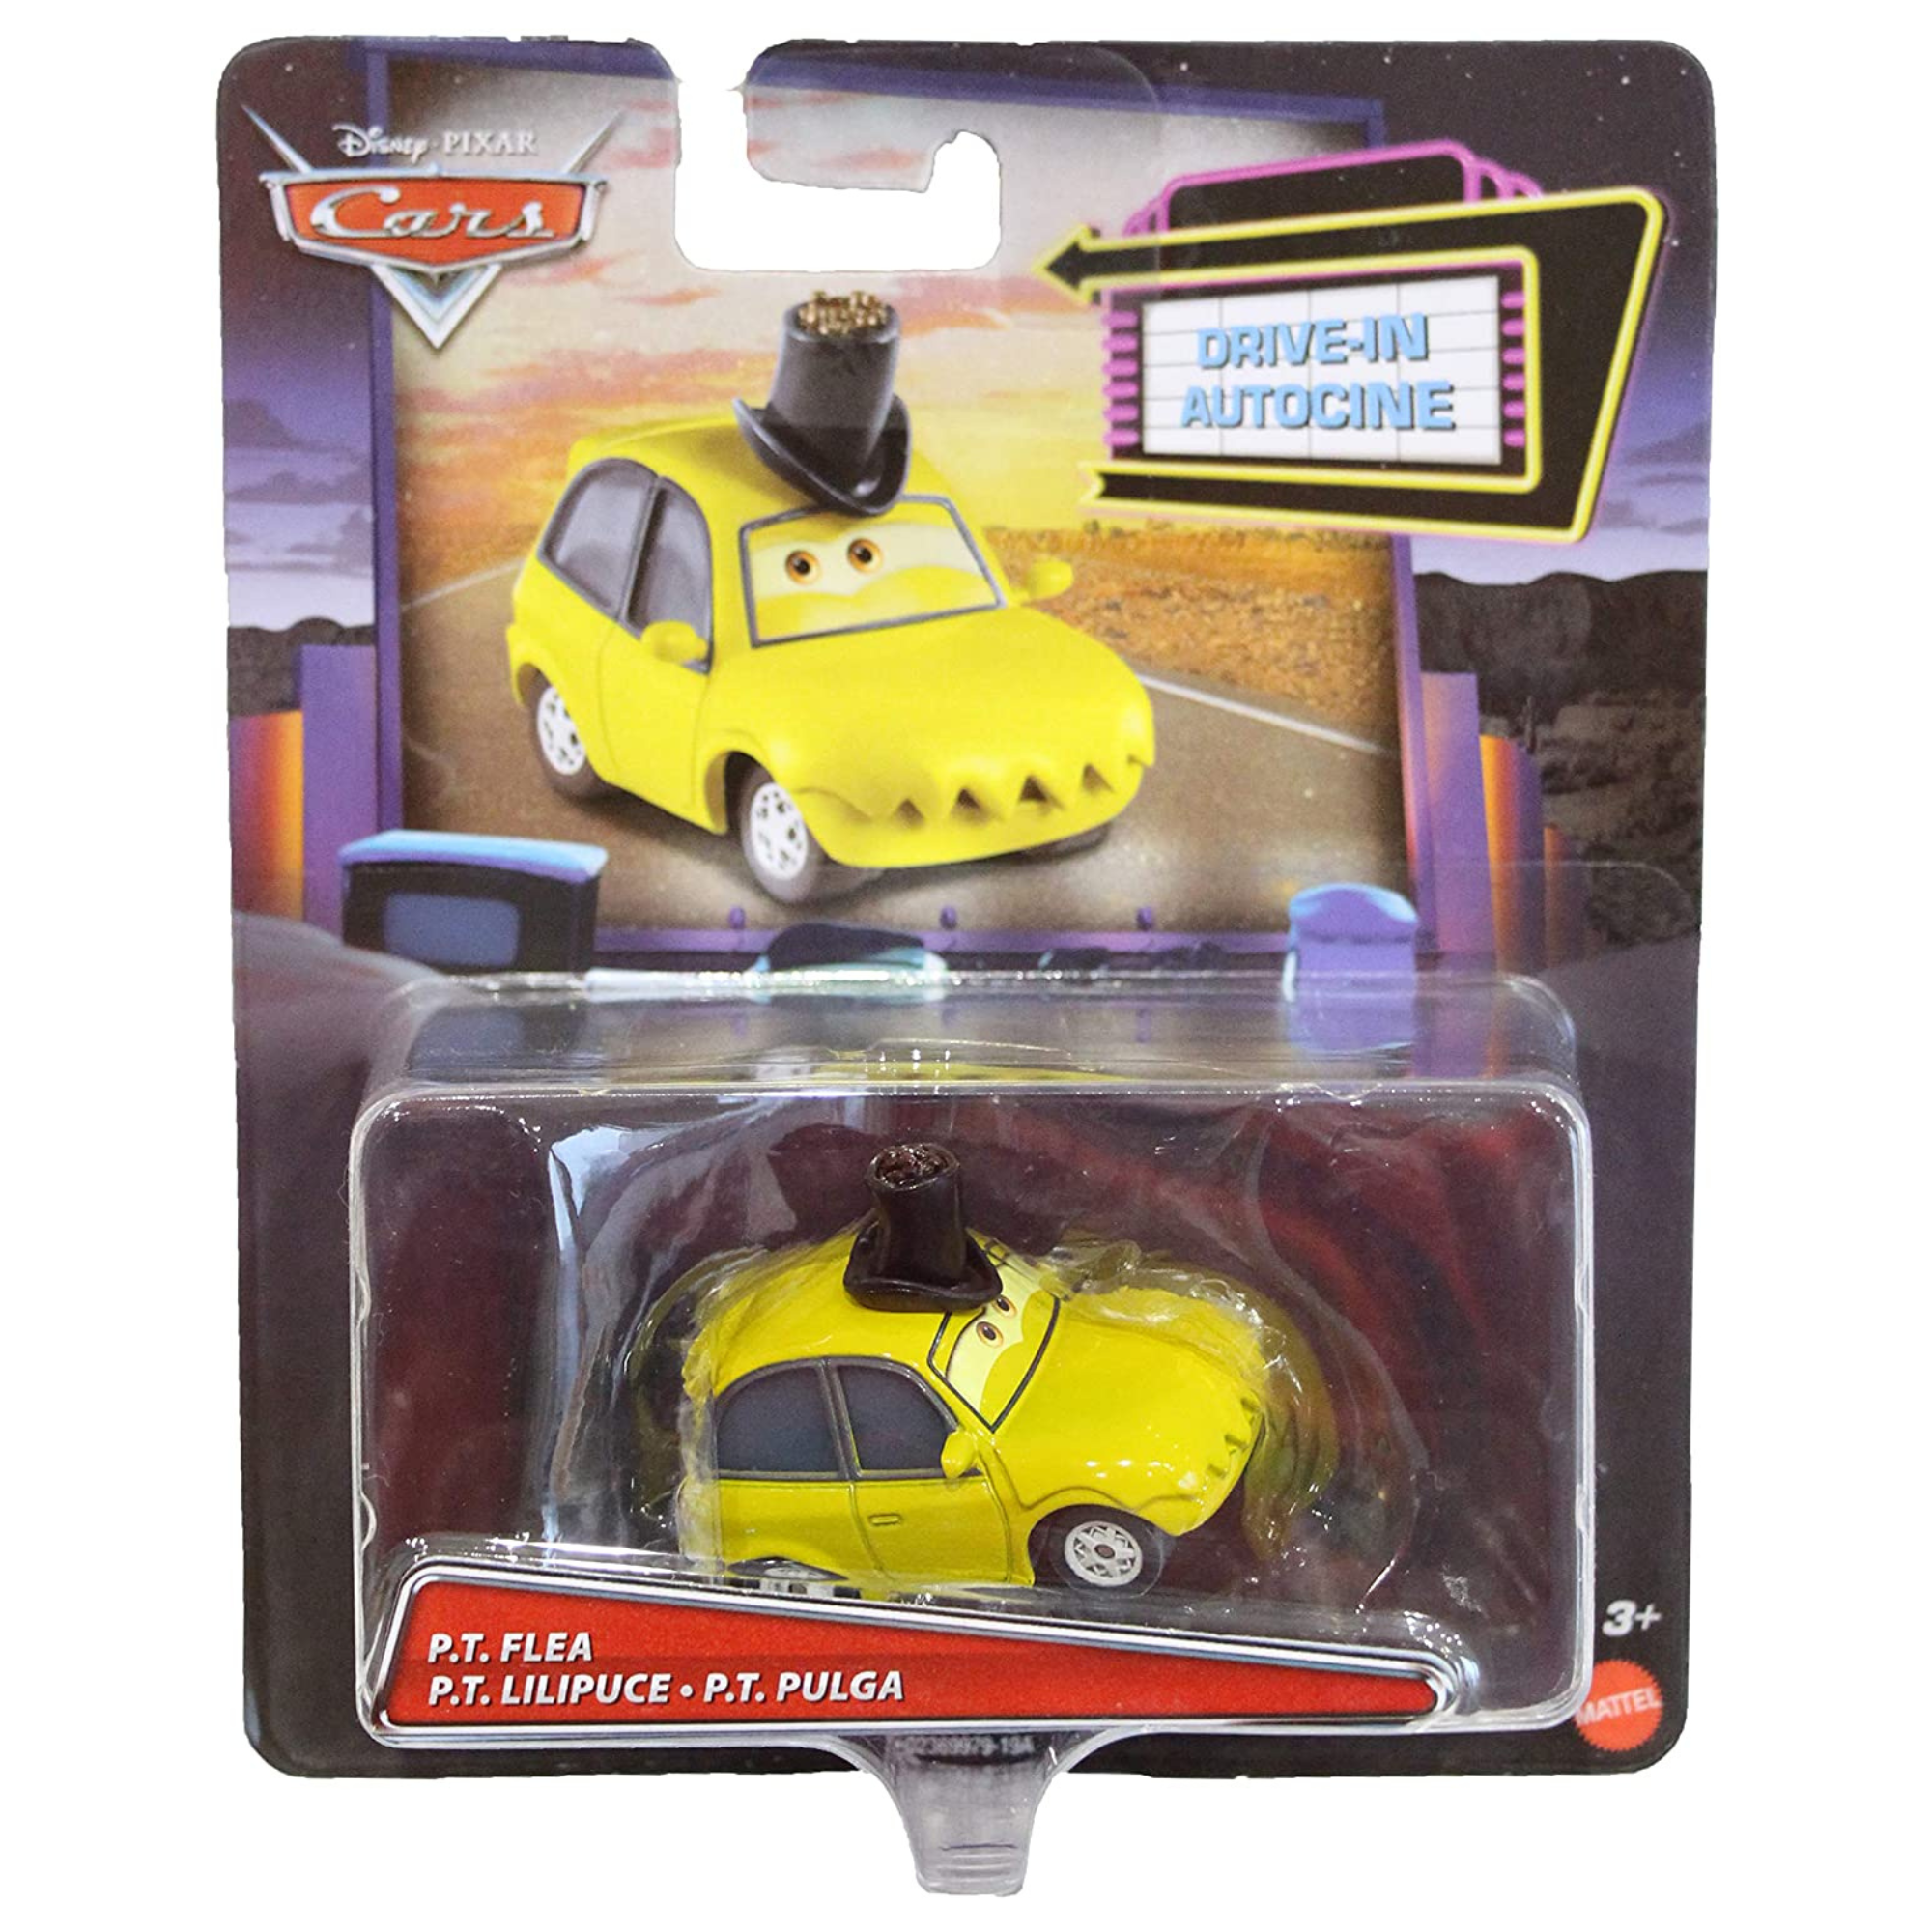 Disney Pixar Cars - A Bug's Life 1/55 Scale Diecast Collectable Character Car Spin-Off Model Vehicle - P.T. Flea - Toptoys2u